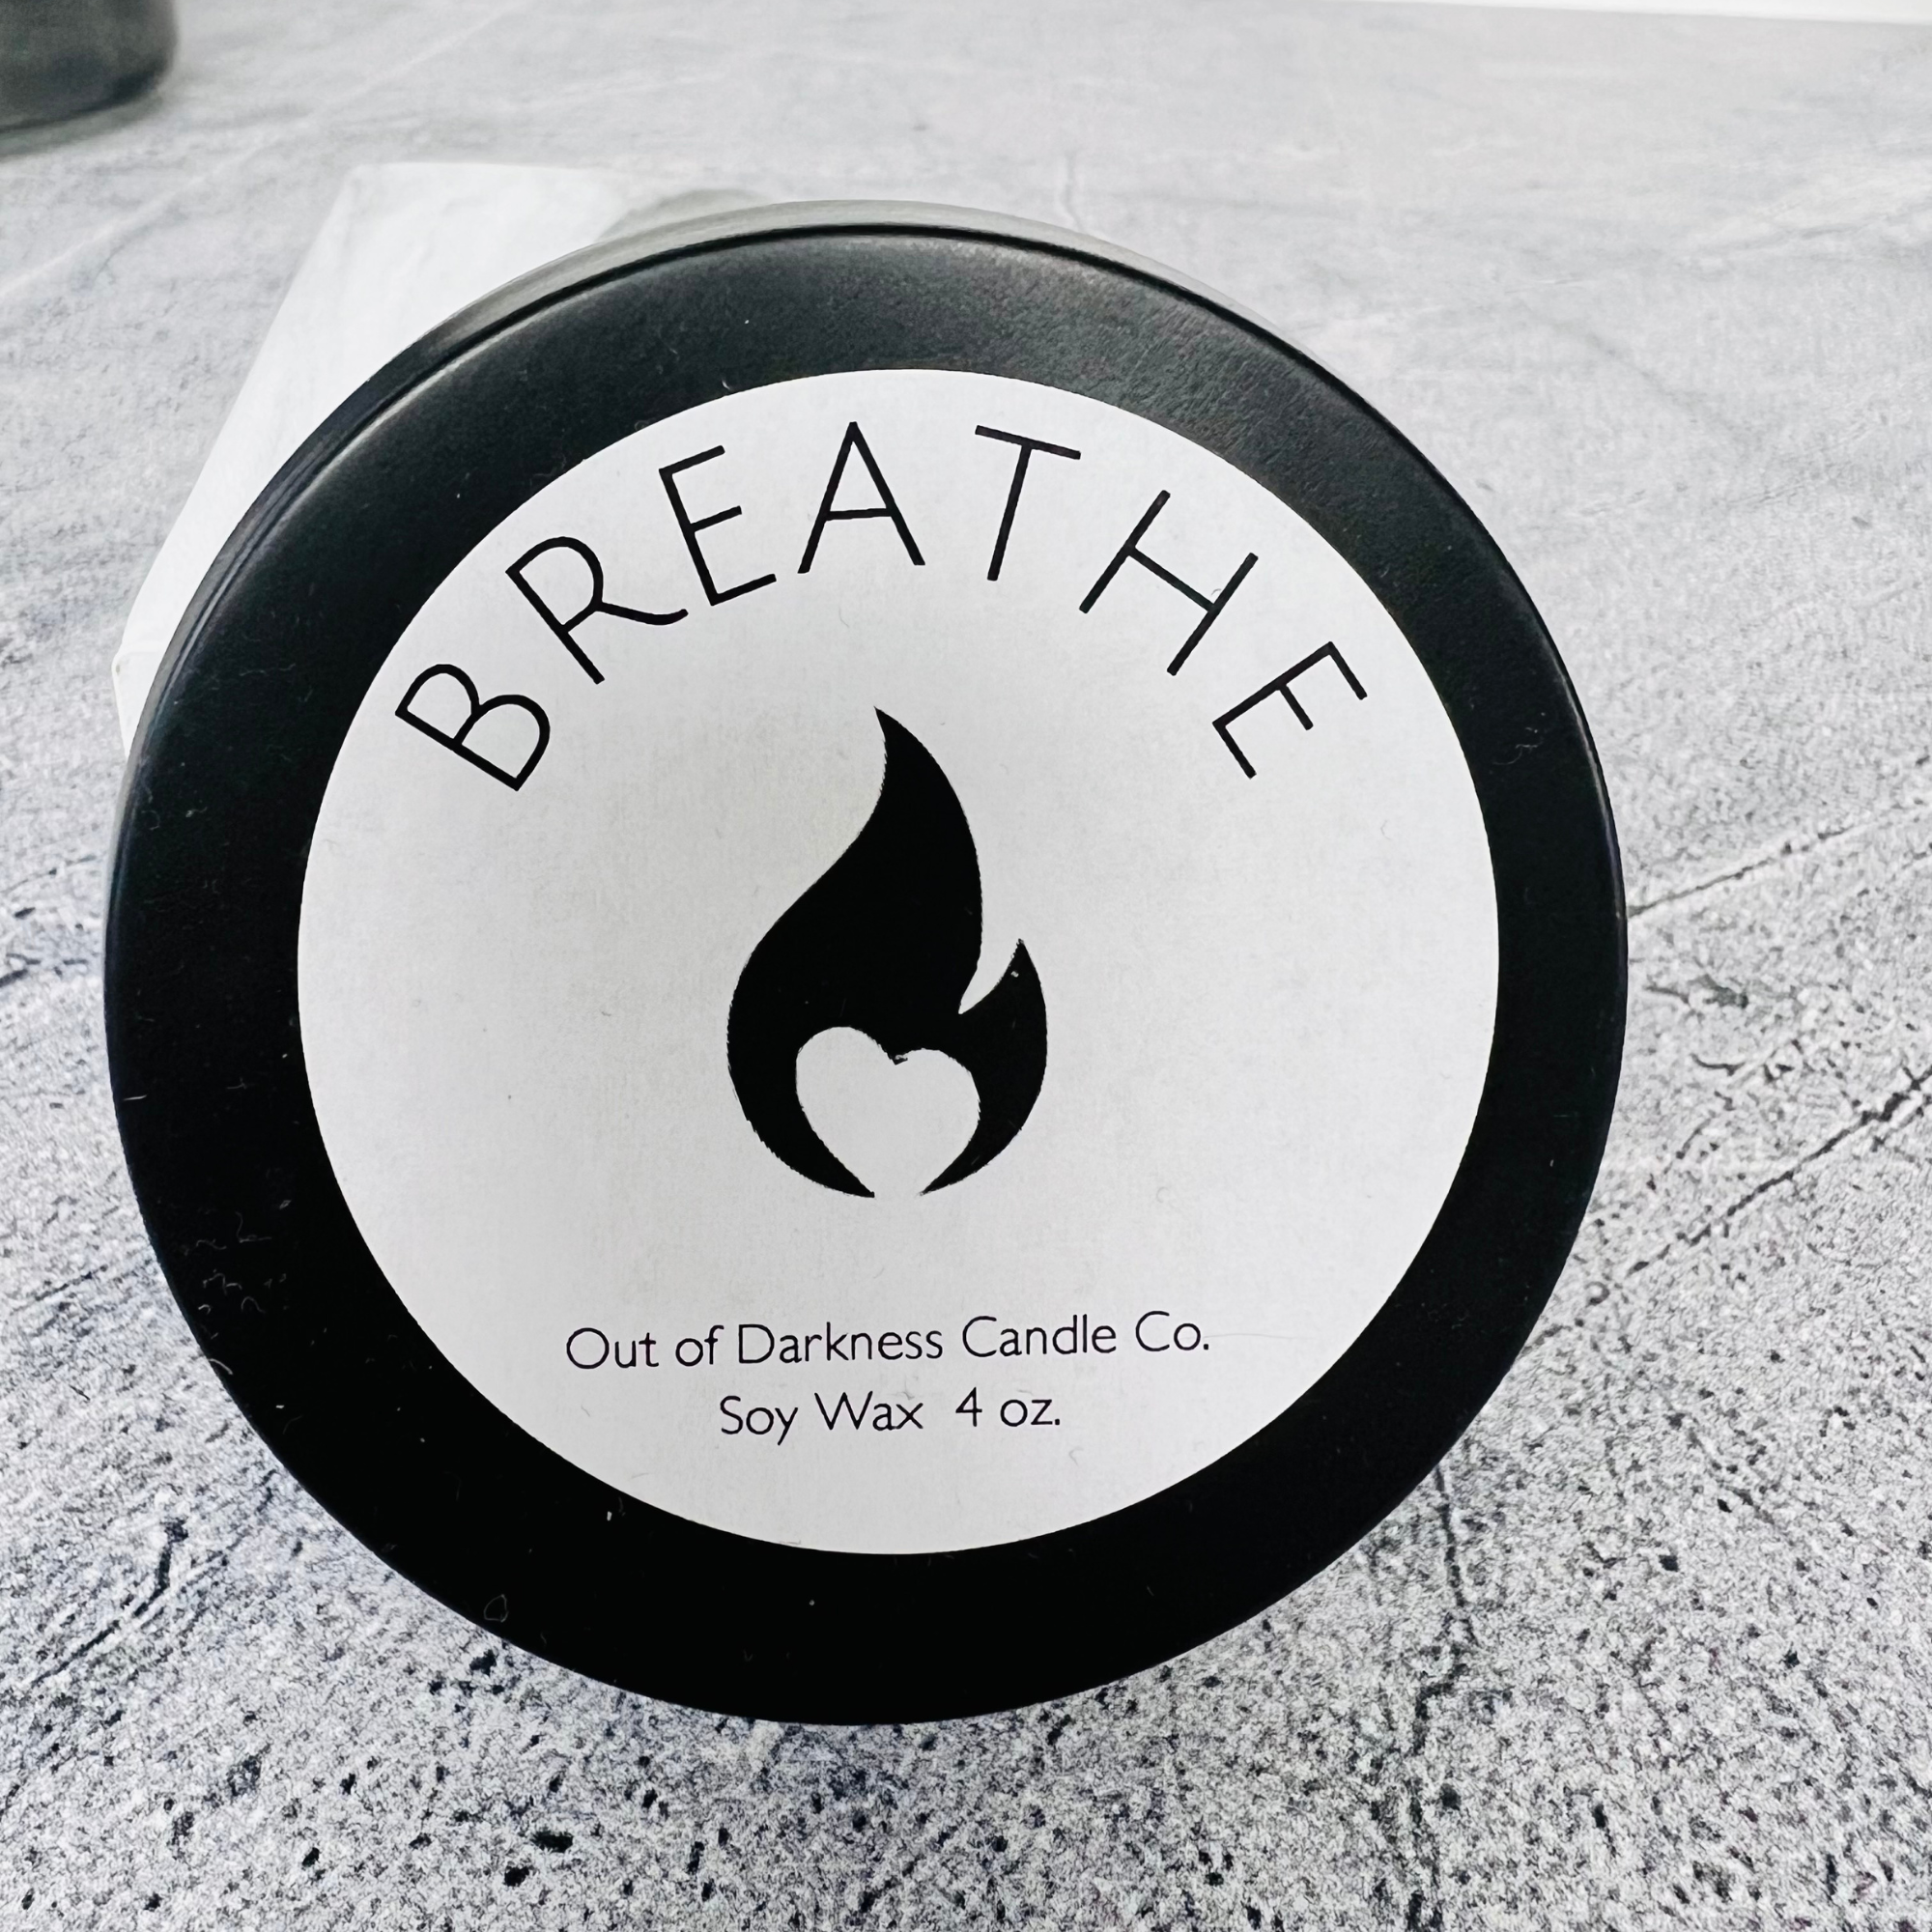 Close up of a Black Matte Candle Tin with a white label on the lid that has a Black Flame - company logo in the middle and says Breathe in all caps around the flame on the bottom of the label it states Out of Darkness Candle Co. Soy Wax 4 oz